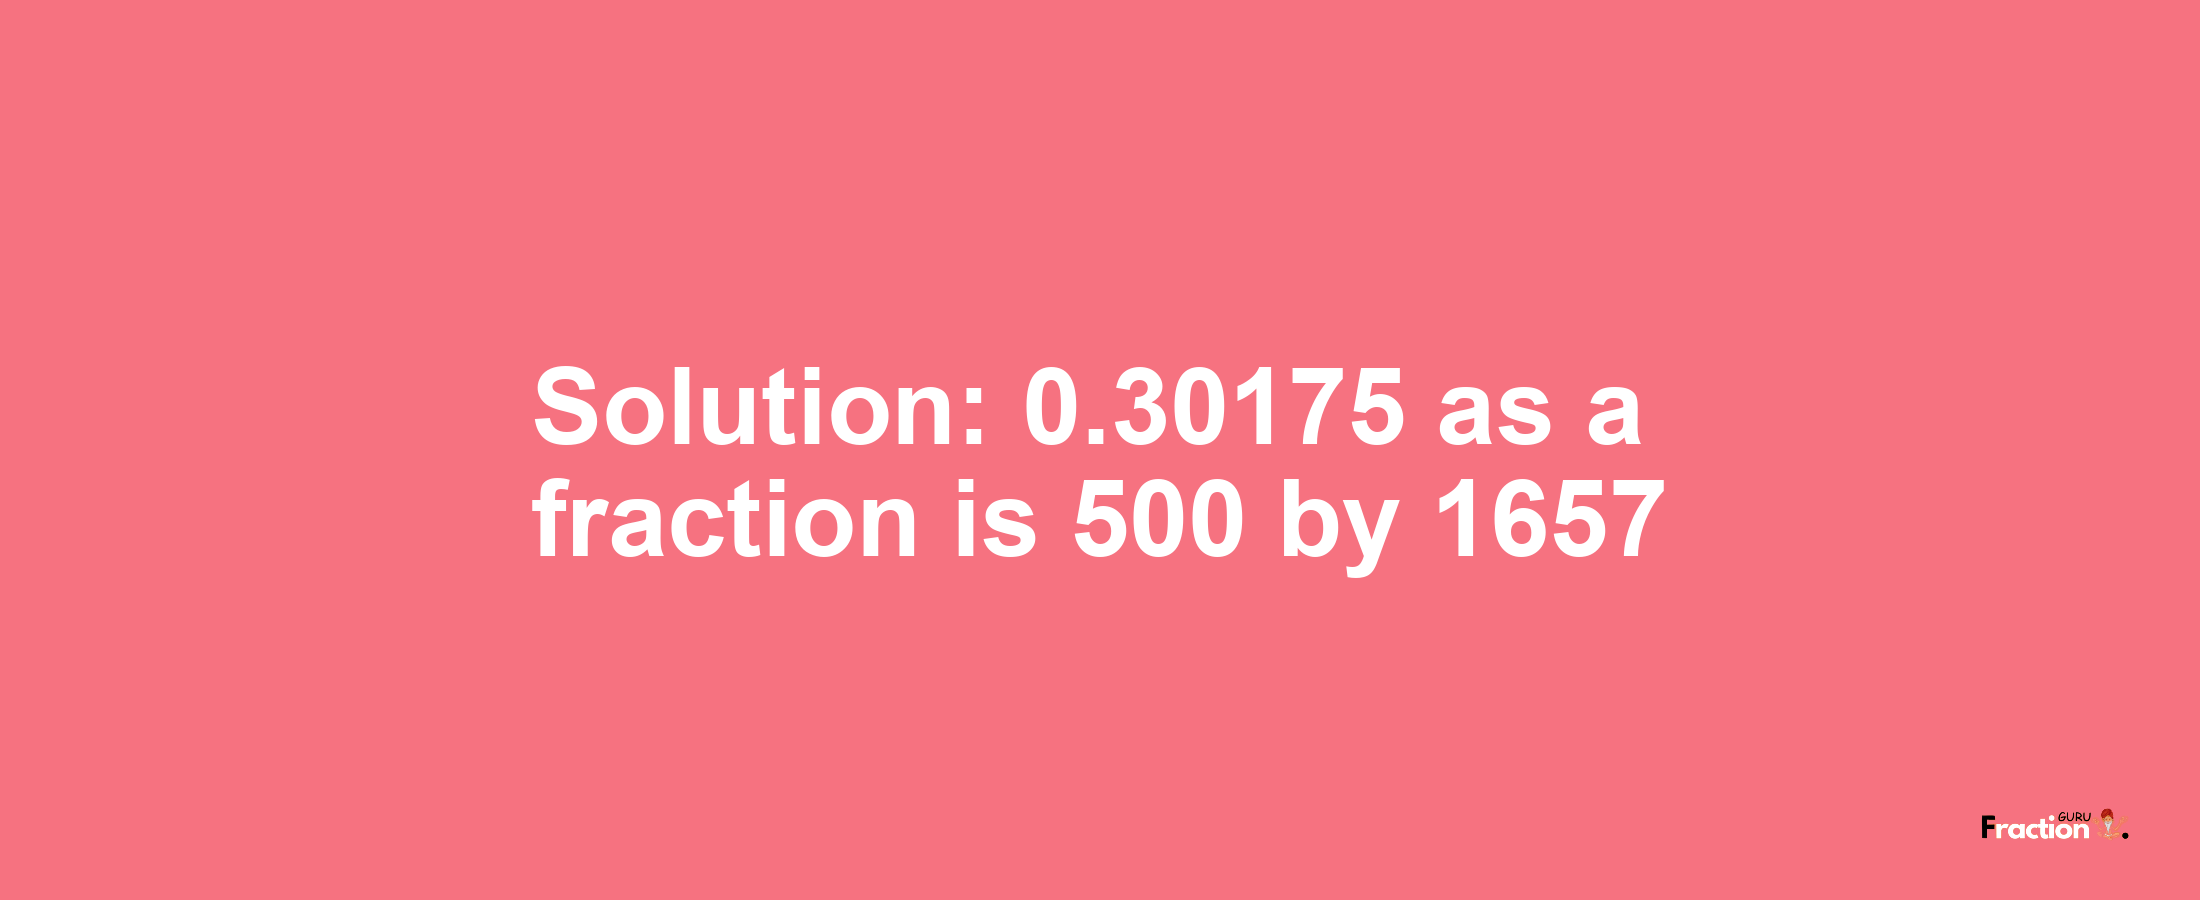 Solution:0.30175 as a fraction is 500/1657